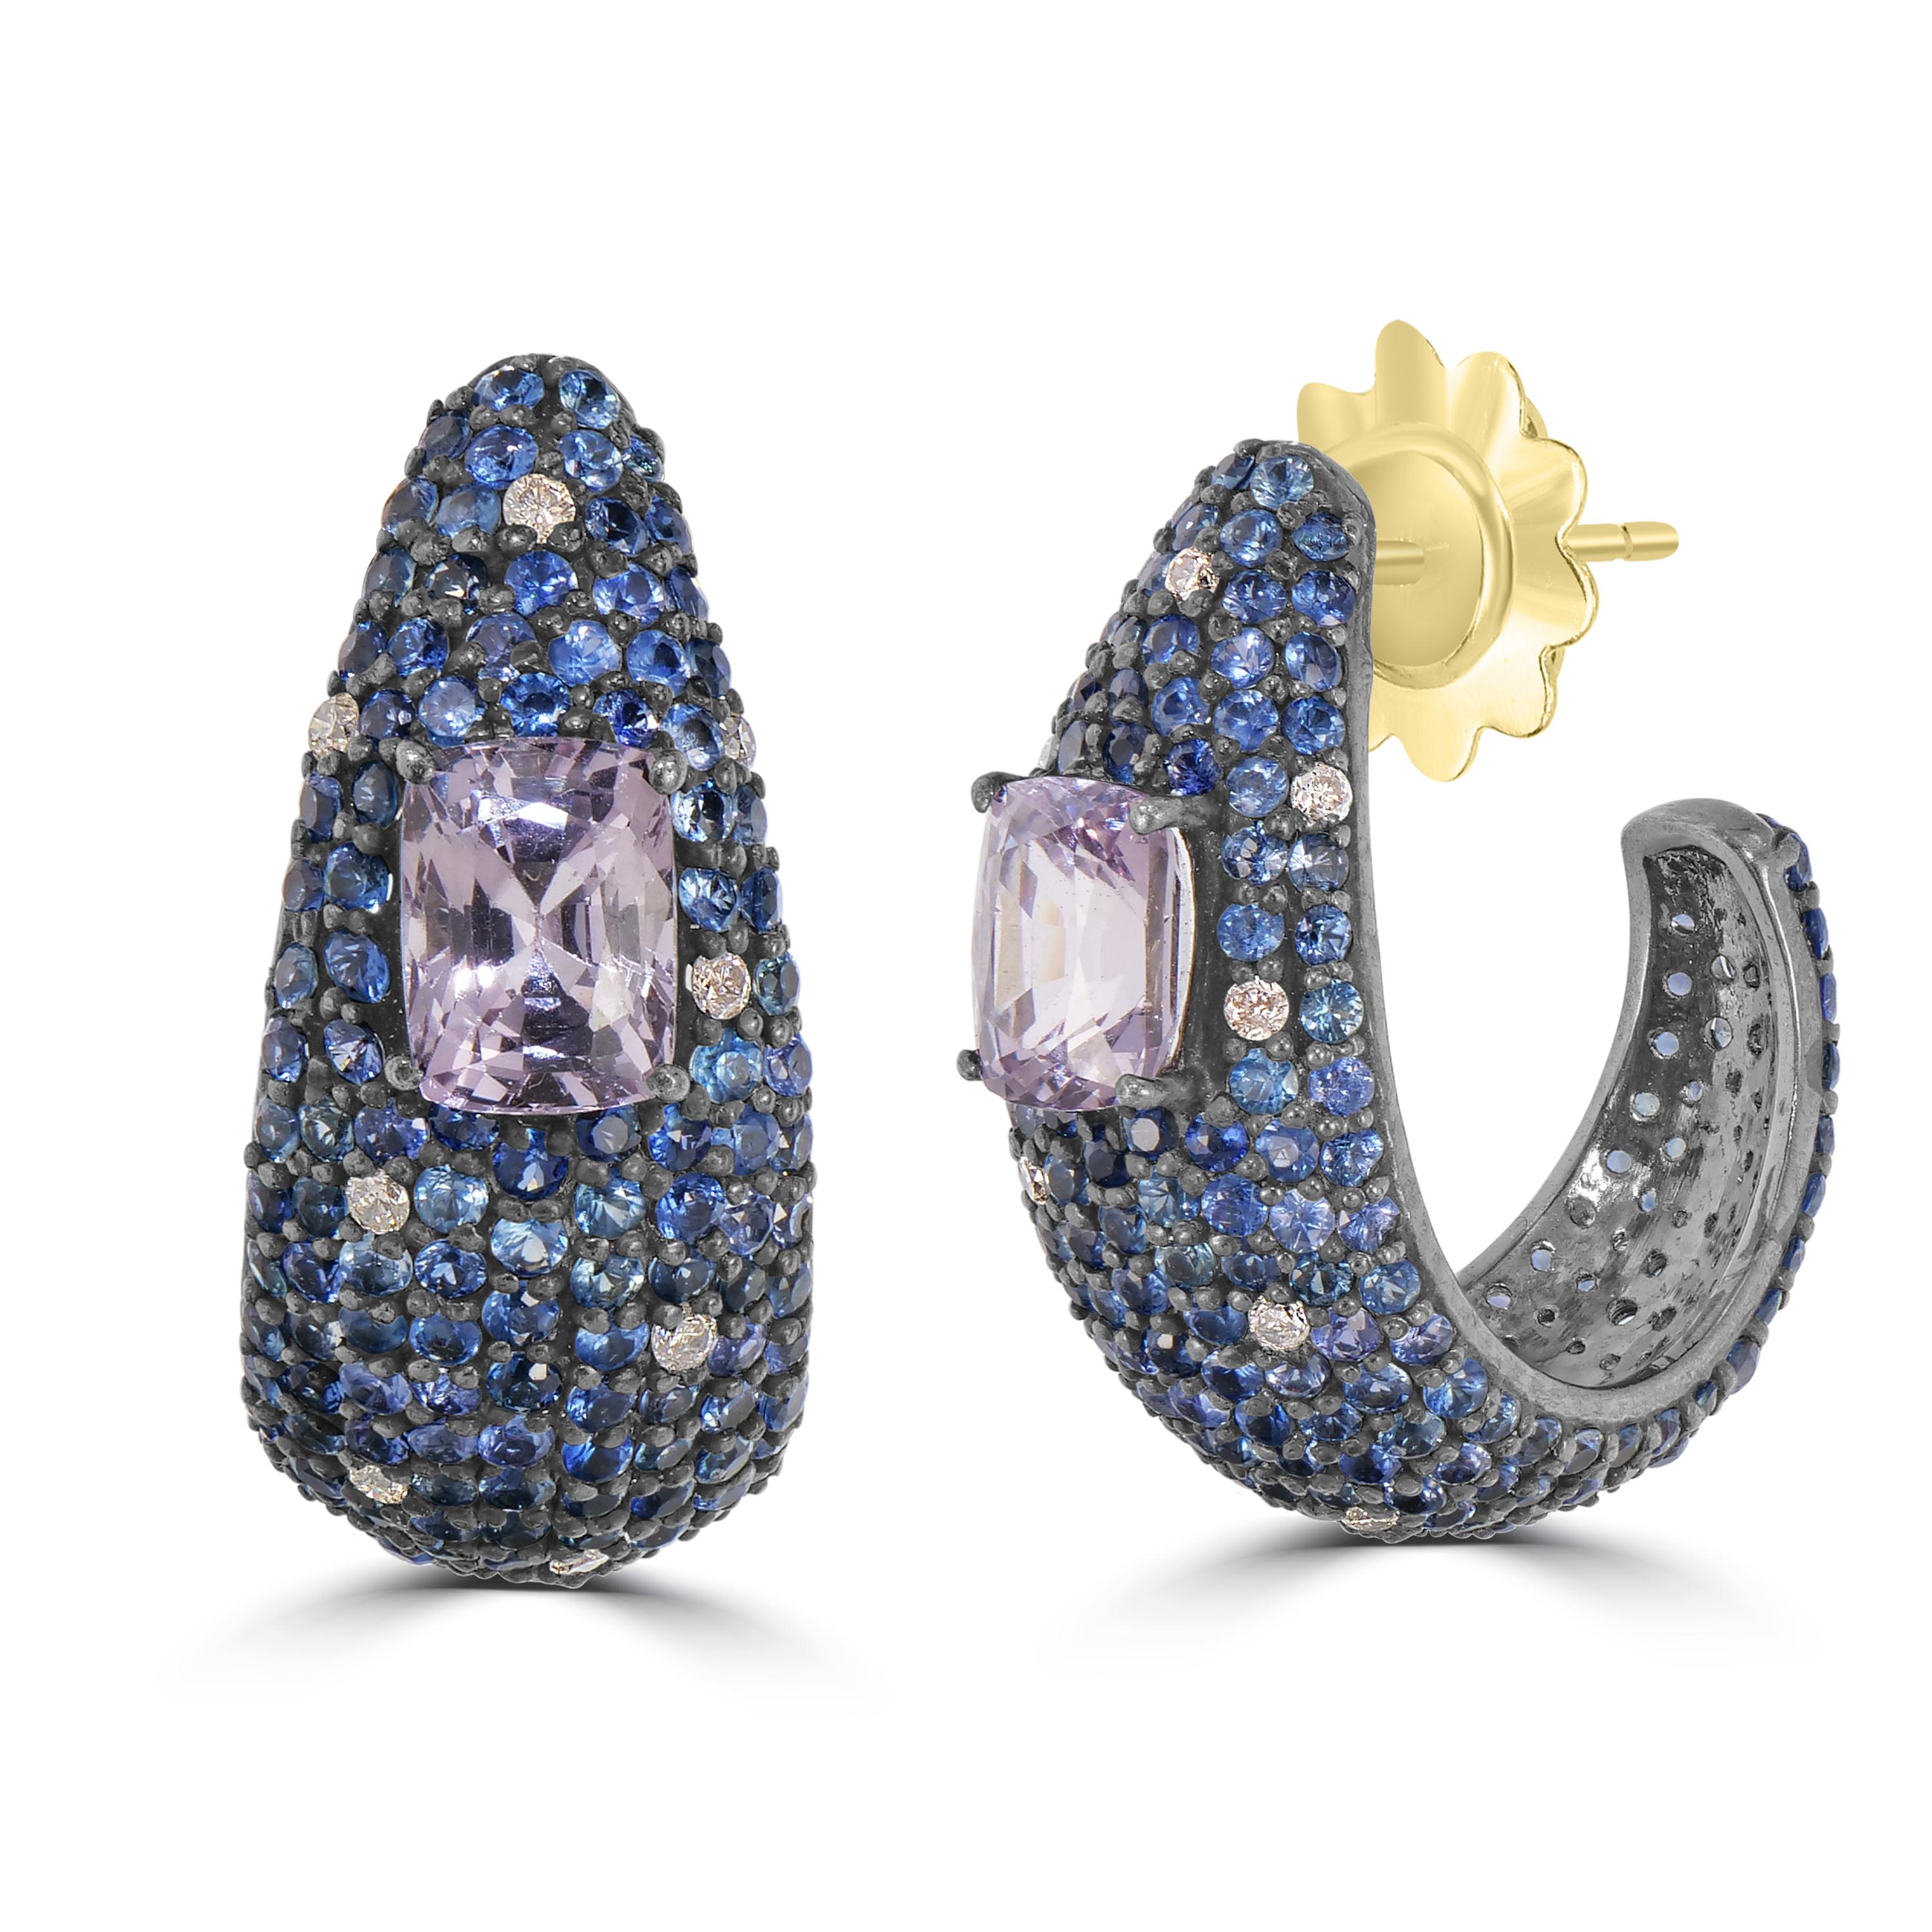 Introducing our Victorian 7.94 Cttw. Blue Sapphire, Spinel, and Diamond Hook Stud Earrings – a captivating fusion of elegance and sophistication.

These stunning stud earrings boast a unique curved design, adorned with a dazzling array of round blue